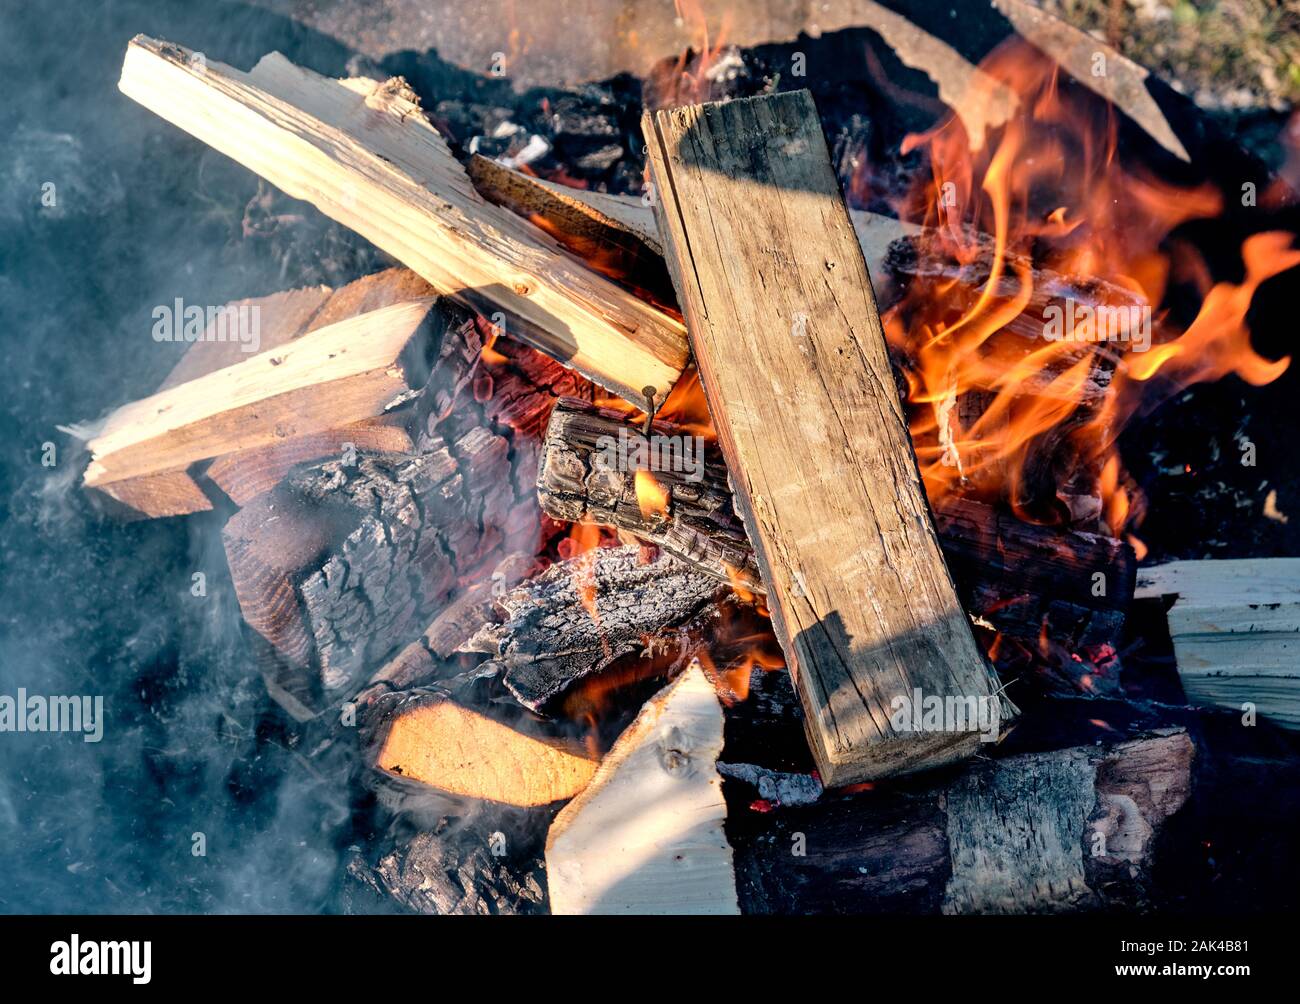 Bonfire with orange flames, new logs and a beautiful hot glow burning outdoors in a firebowl made of steel. Seen in Bavaria, Germany in January Stock Photo